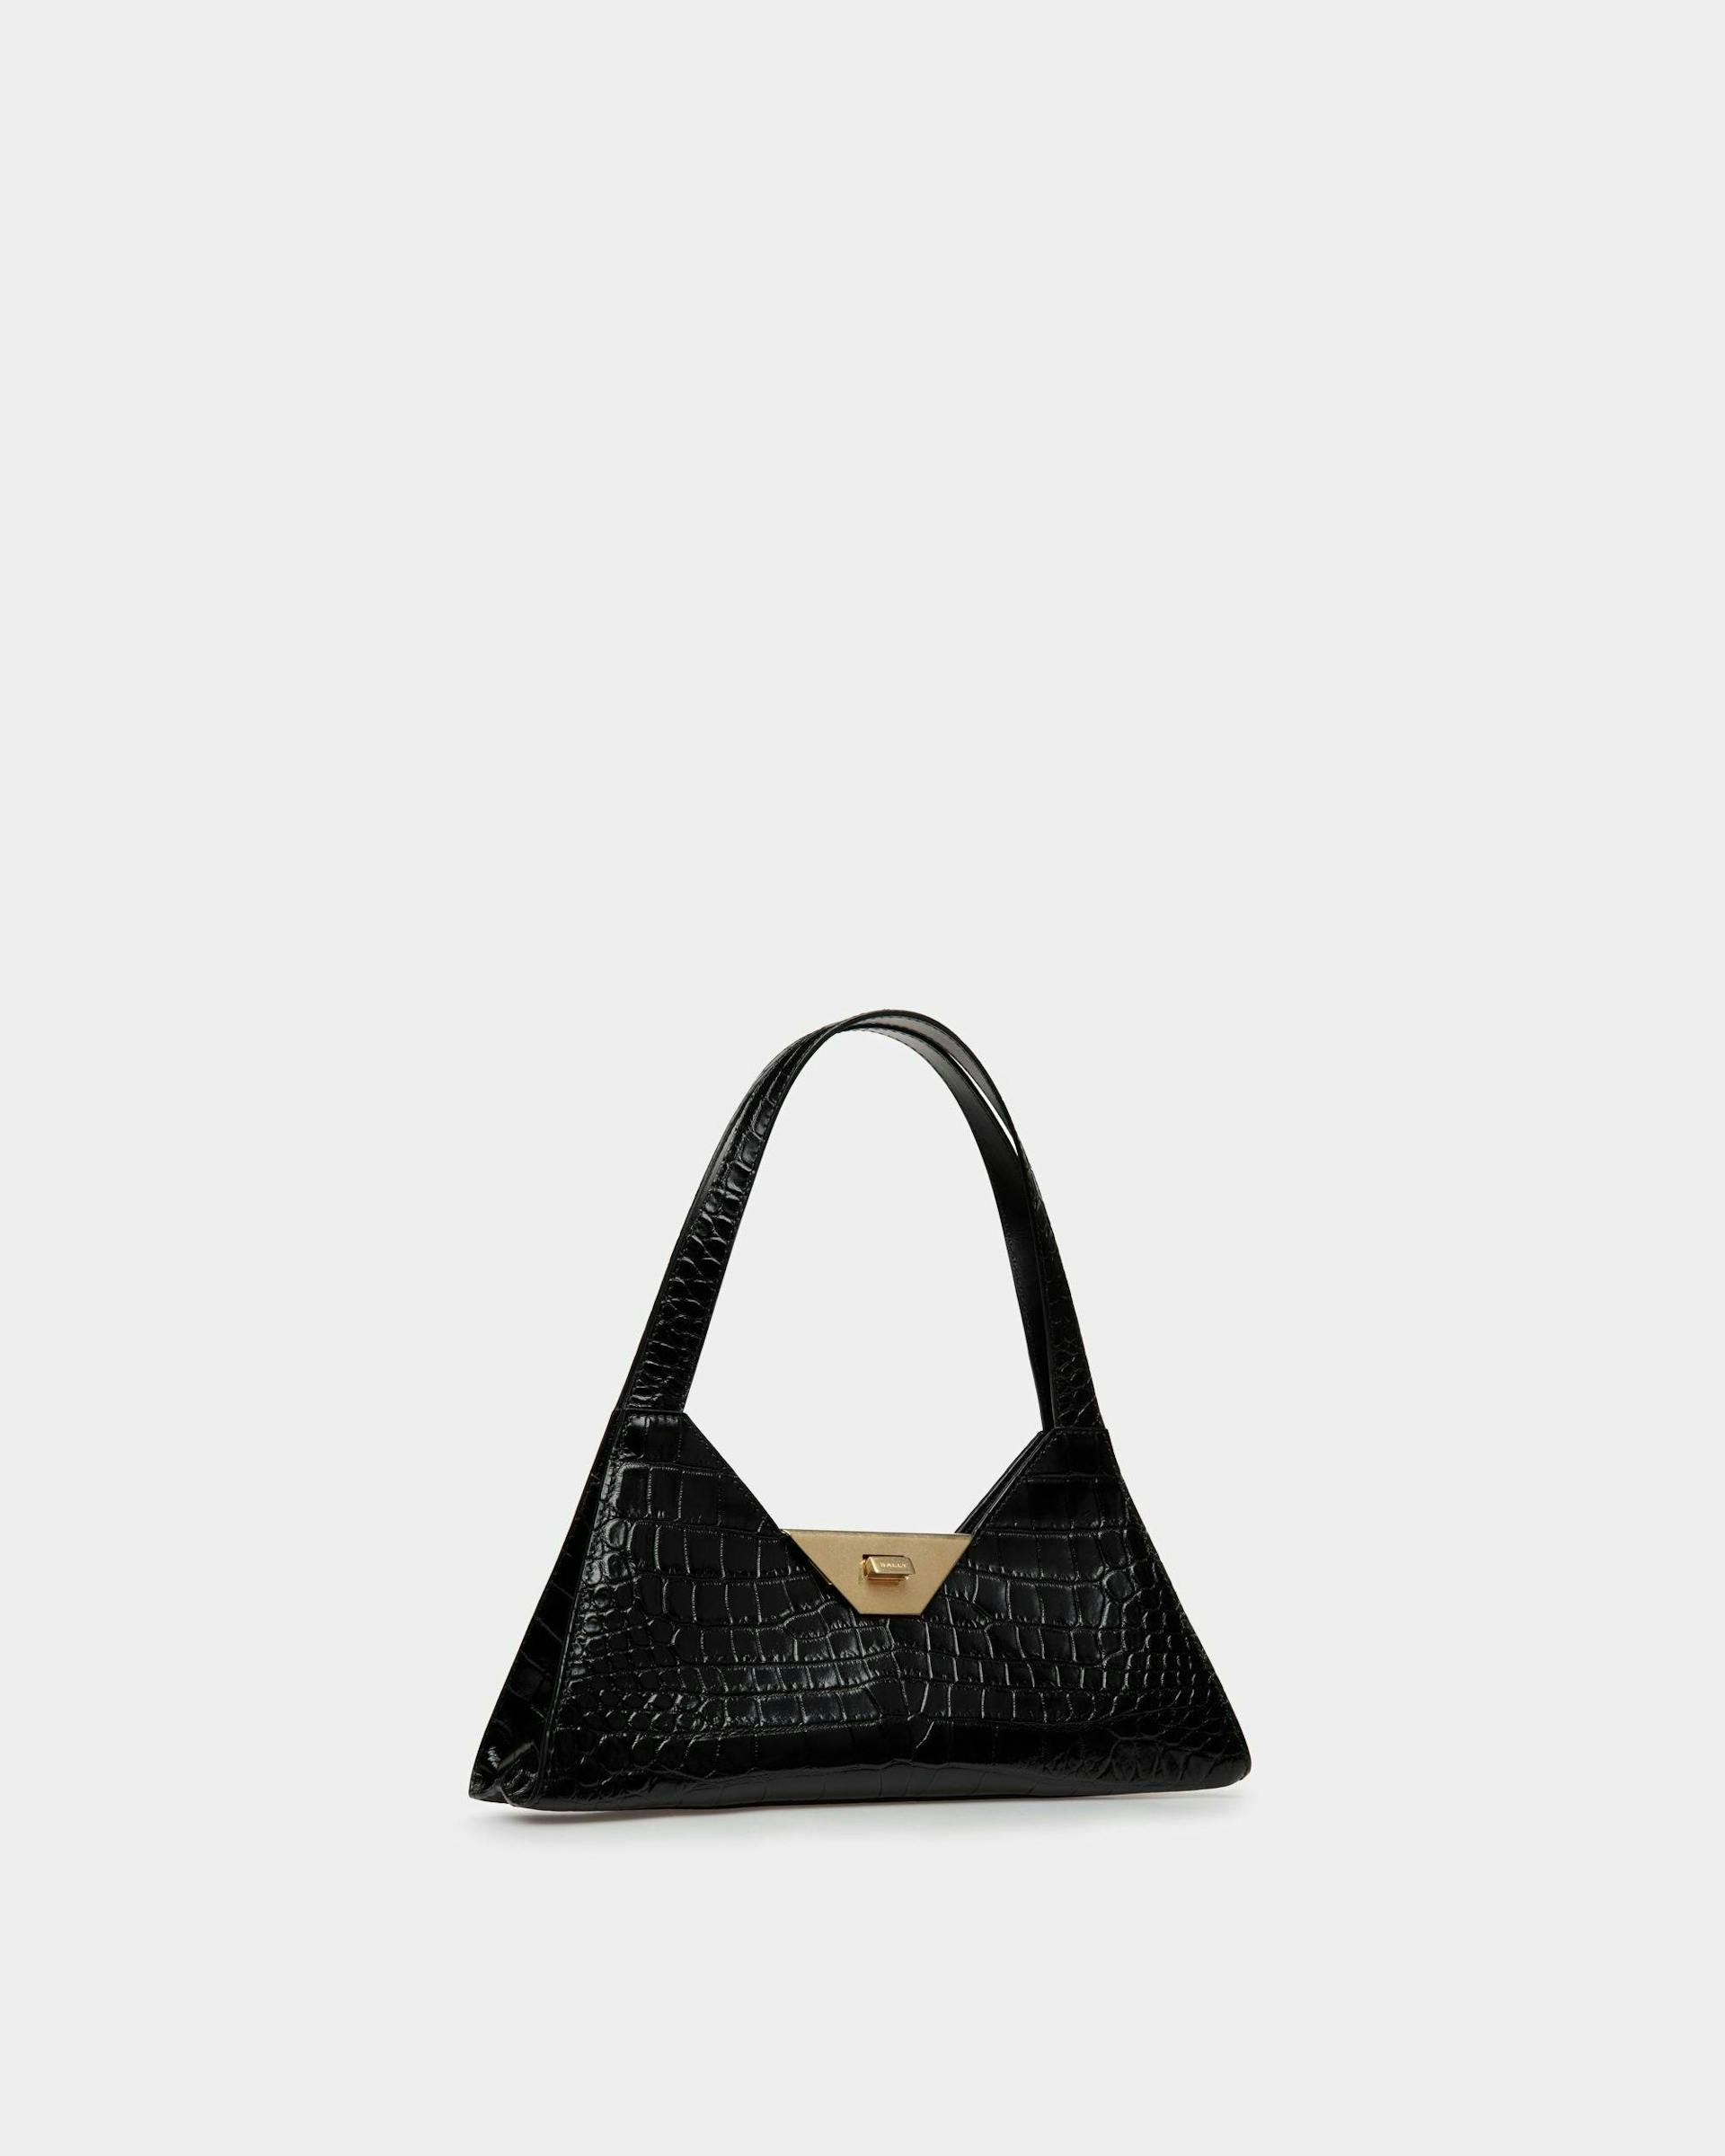 Women's Trilliant Small Shoulder Bag In Black Leather | Bally | Still Life 3/4 Front